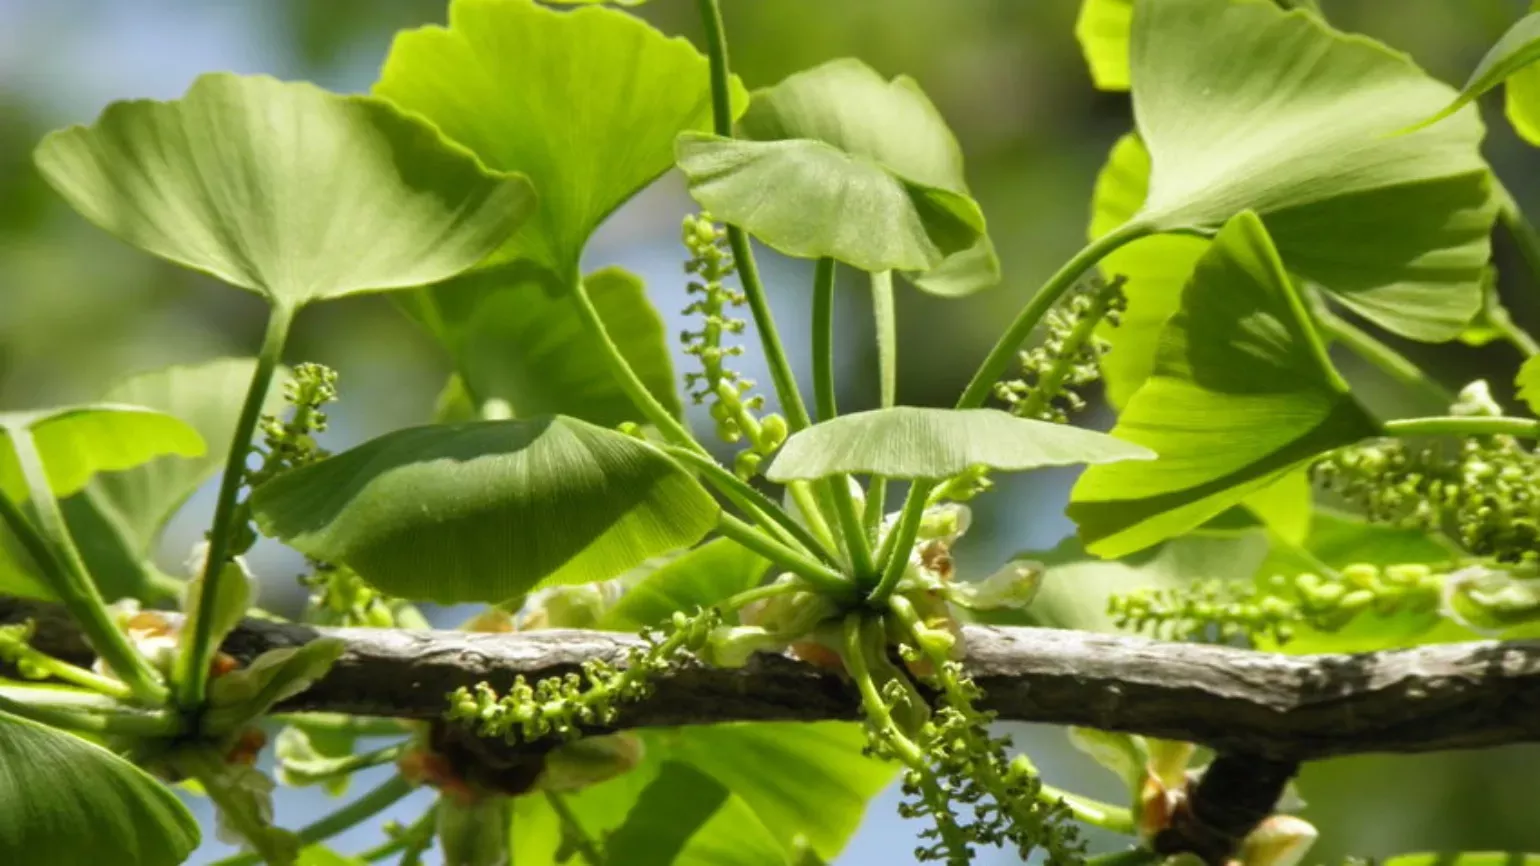 fan-shaped, green leaves and floral spikes of maidenhair tree